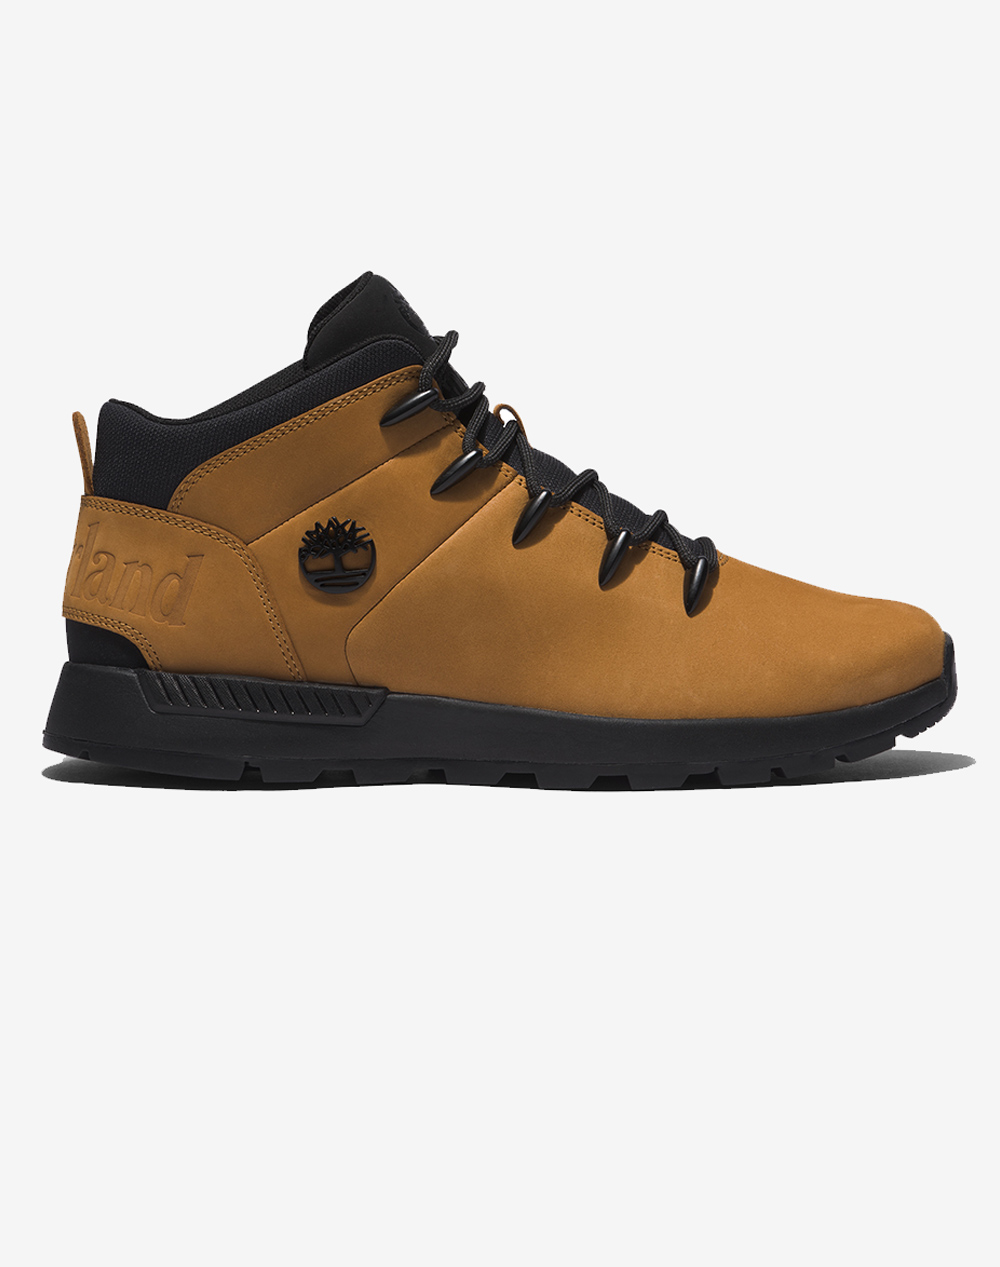 TIMBERLAND MID LACE UP SNEAKER